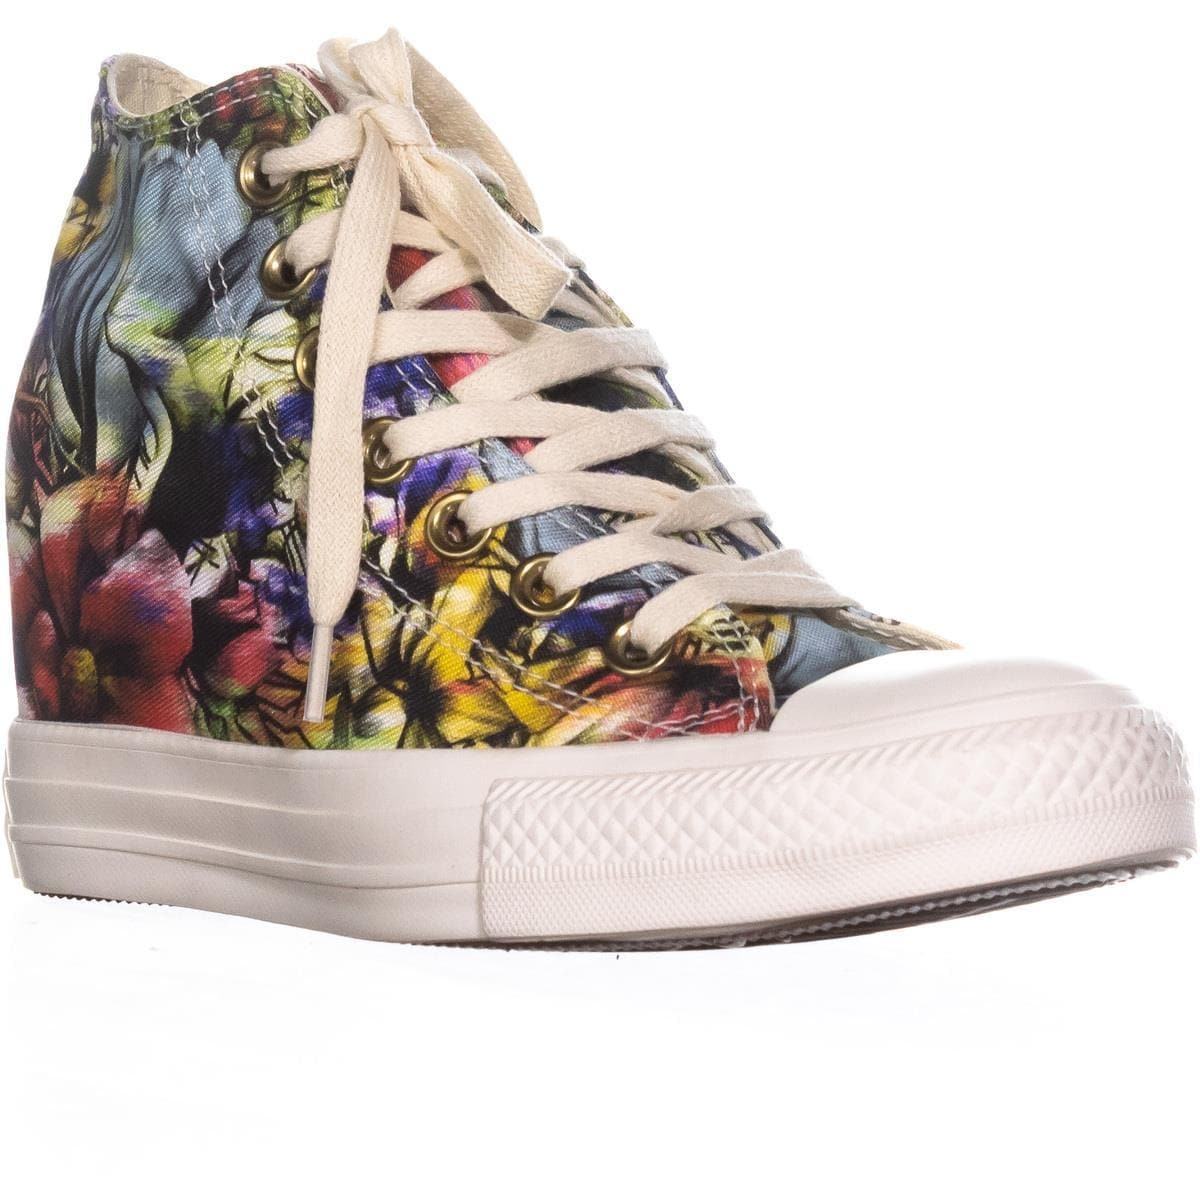 converse lux wedge